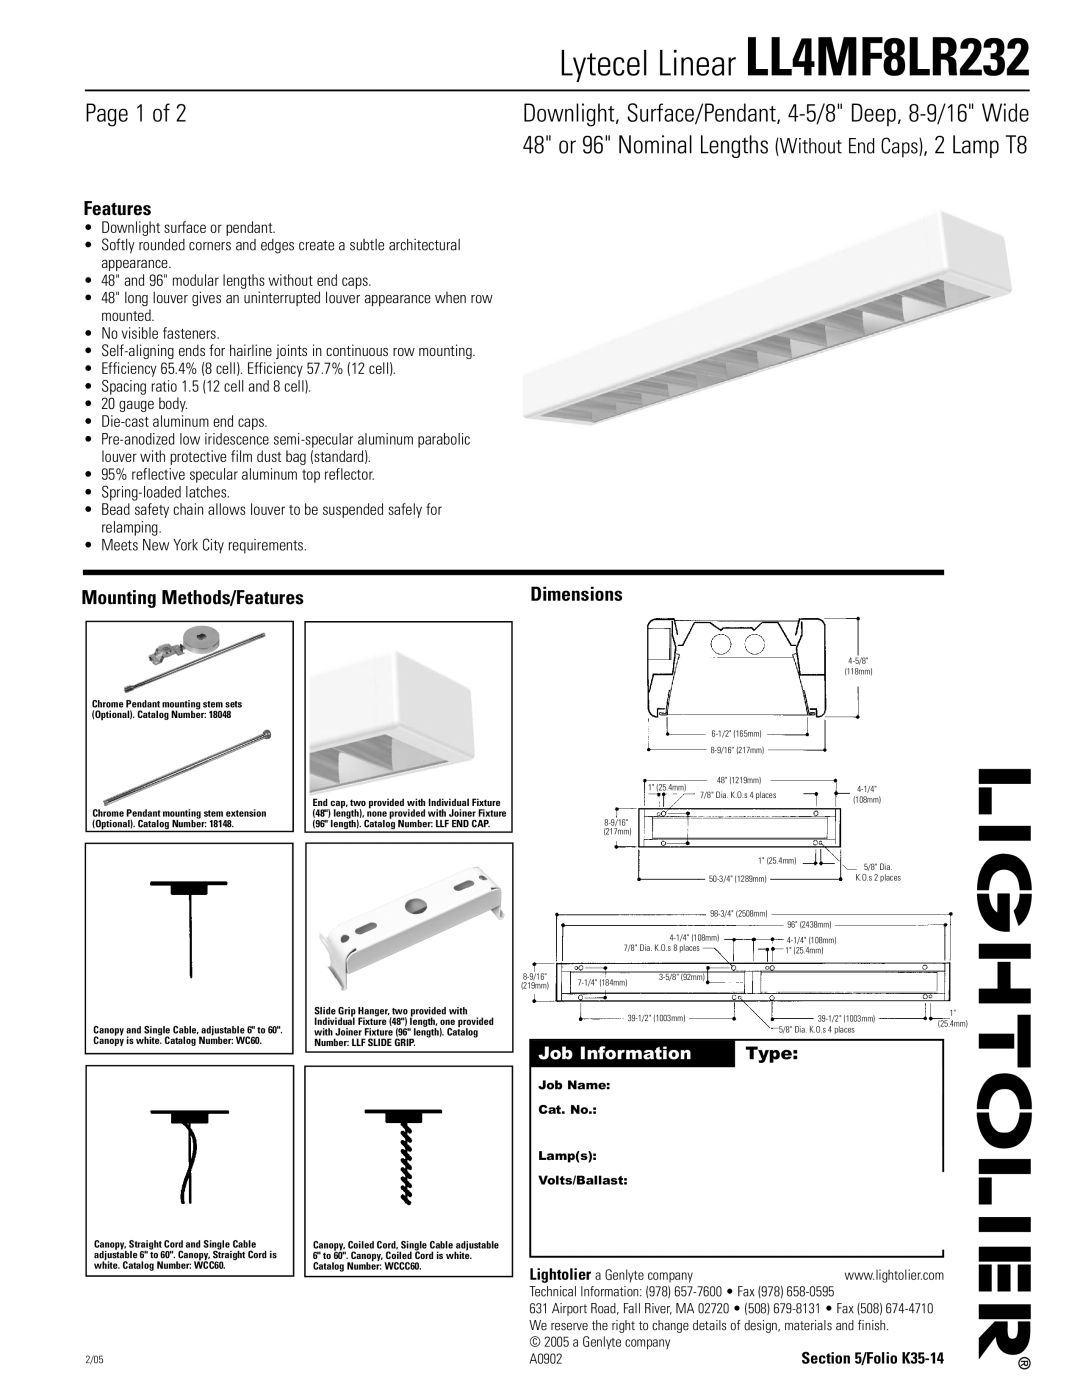 Lightolier dimensions Lytecel Linear LL4MF8LR232, Page 1 of, Mounting Methods/Features, Job Information, Type 